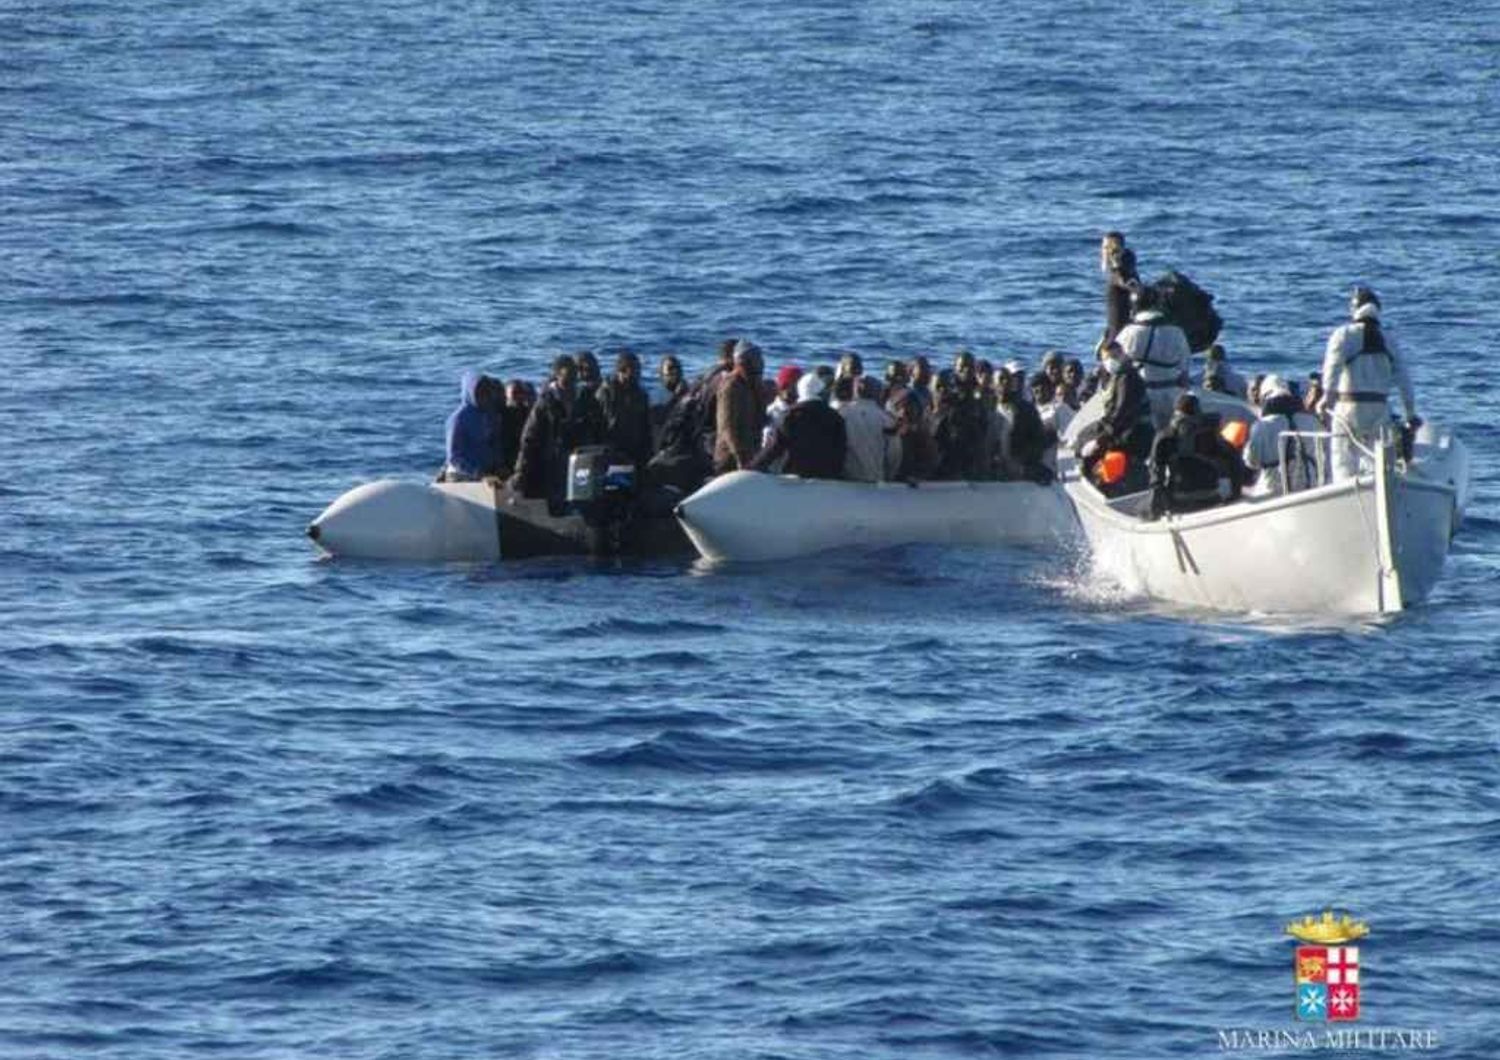 Boat of immigrants rescued off Sicily with 30 dead